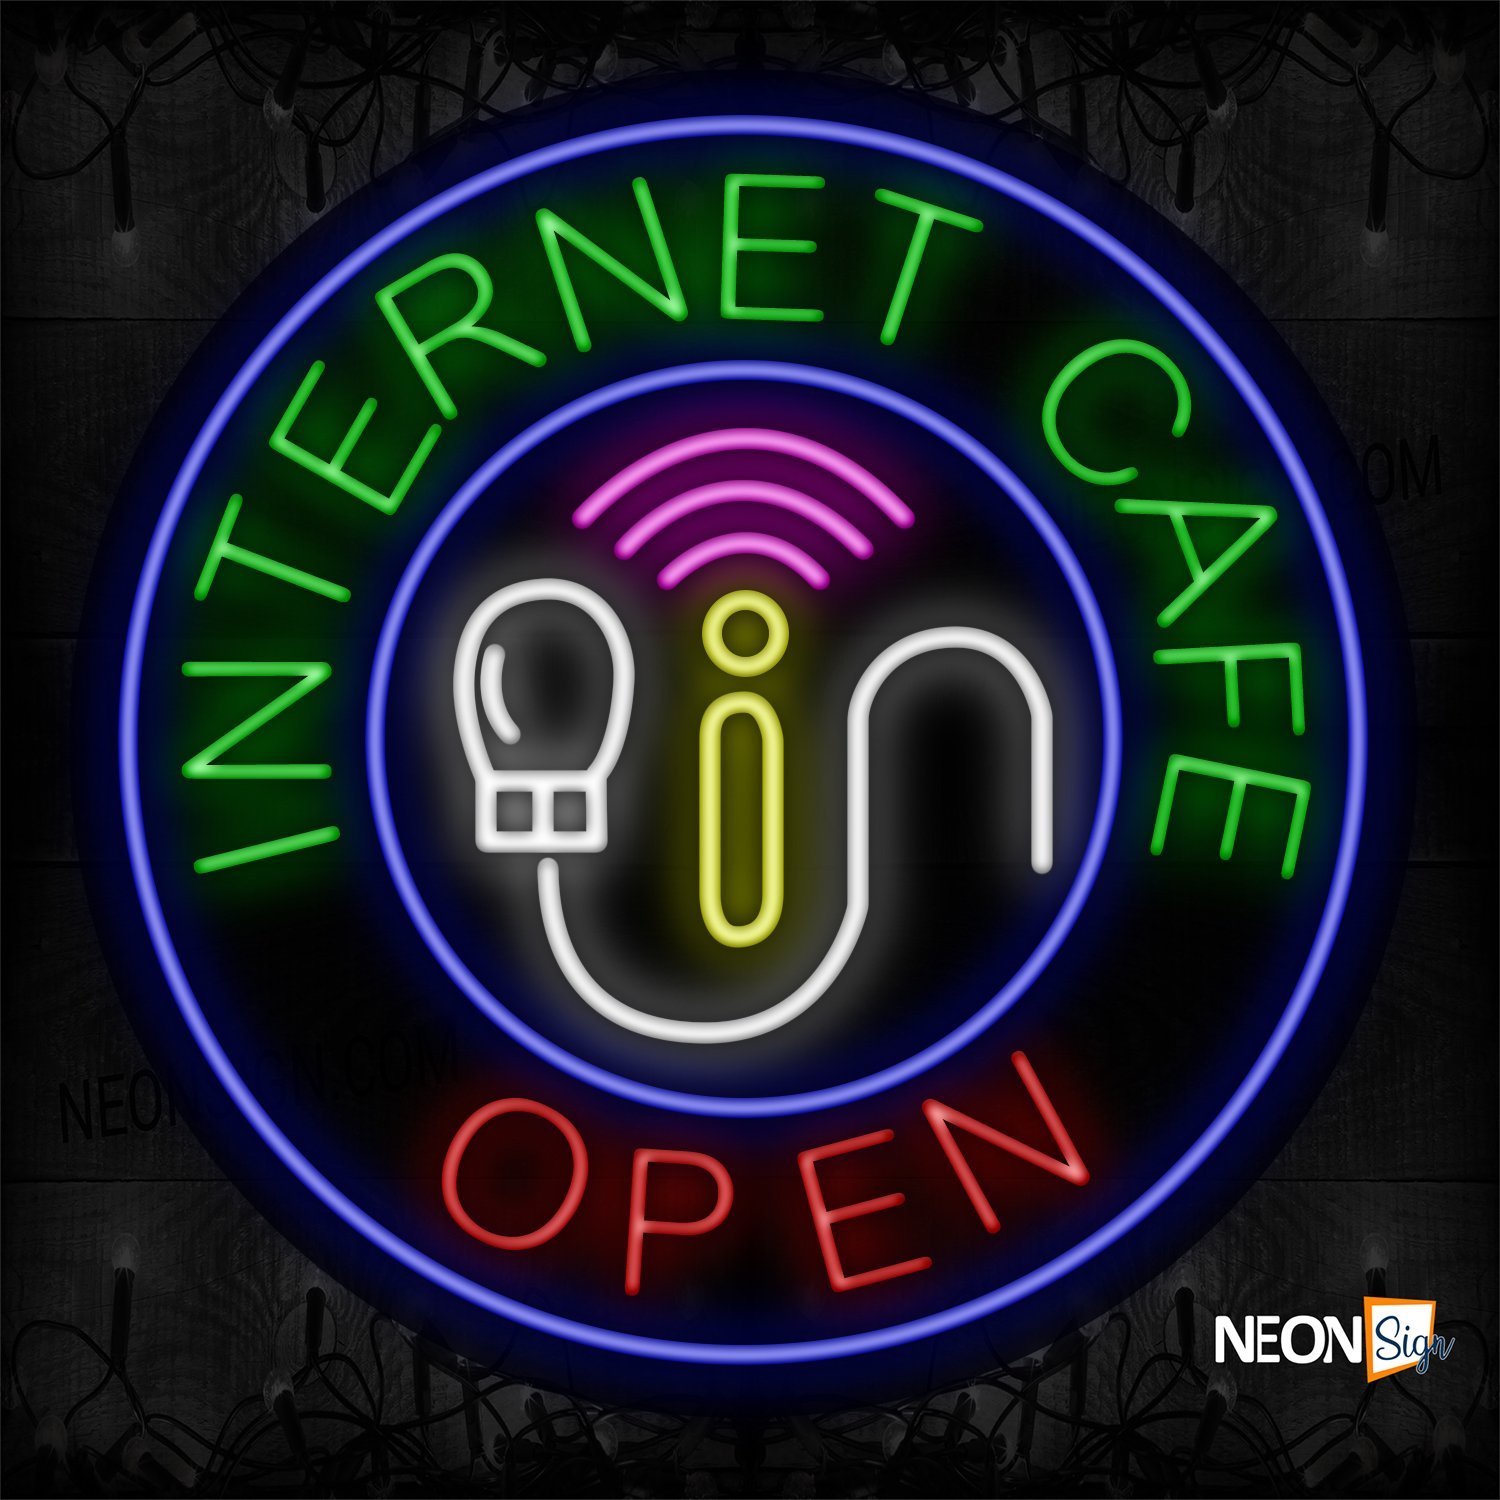 Image of 11823 Open Internet Cafe With Wifi Image & Charger Circle Border Led Bulb Sign_26x26 Black Backing